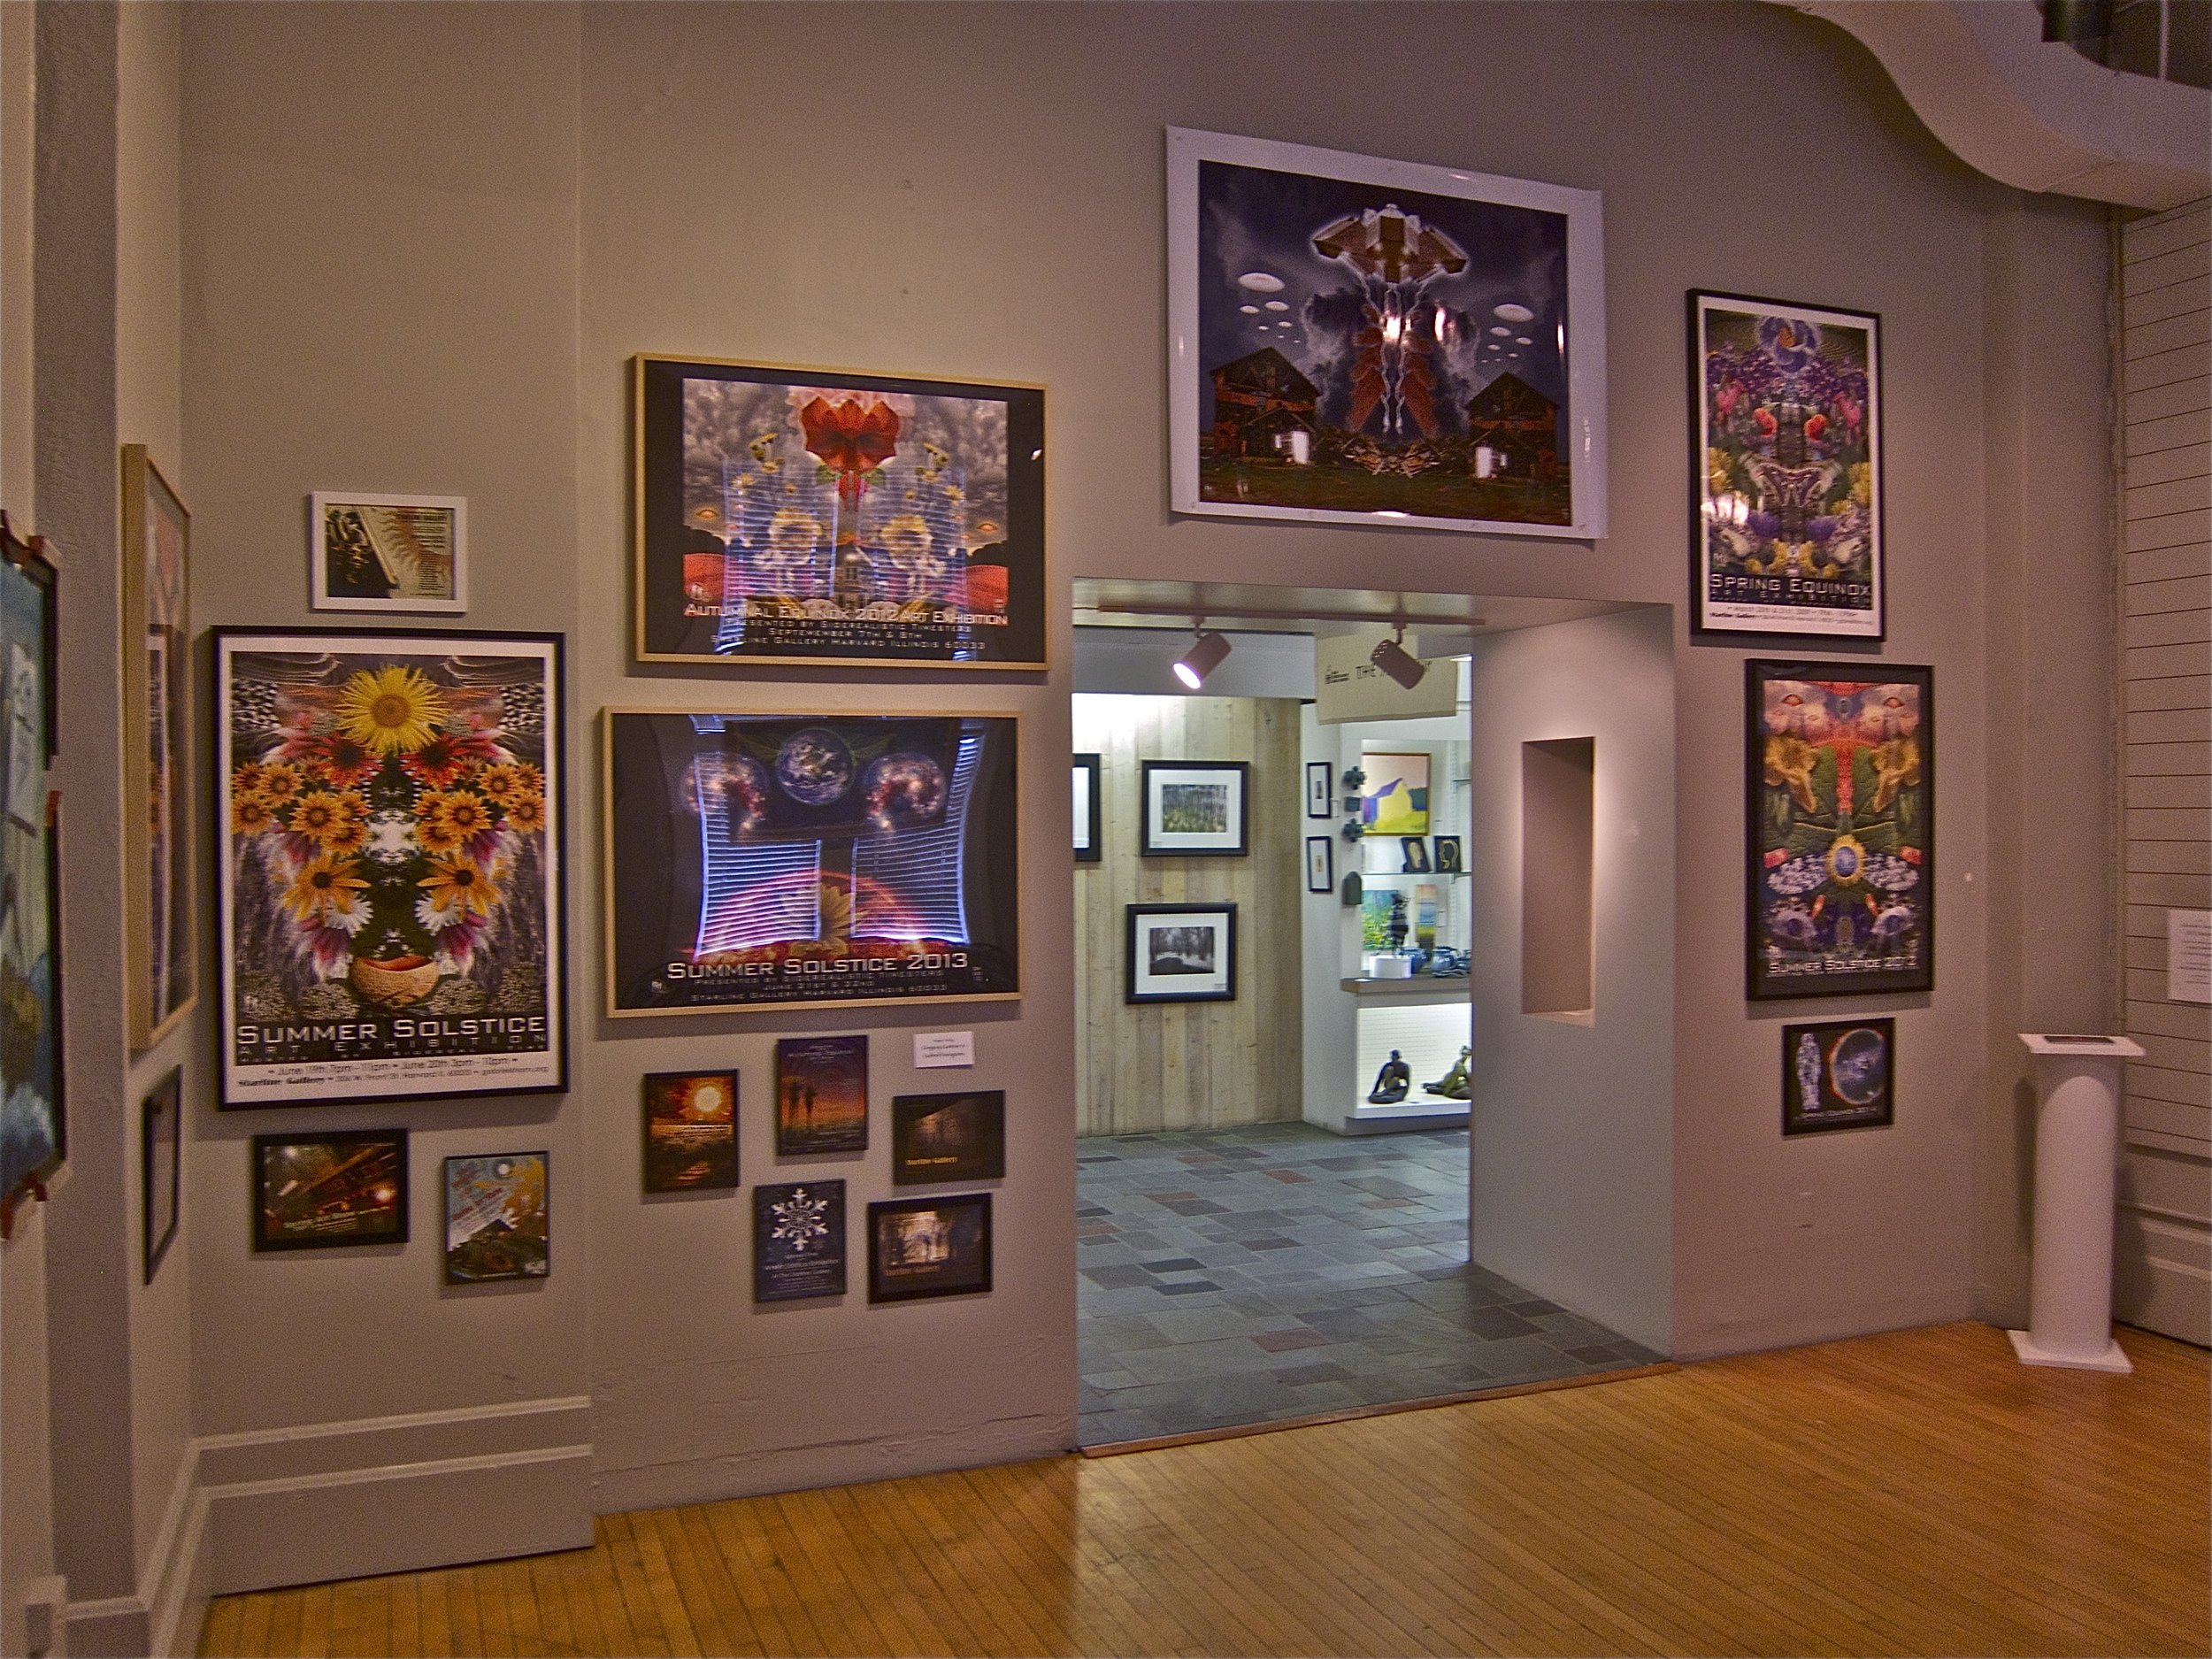 Summer Solstice 2014 at The Courthouse Gallery